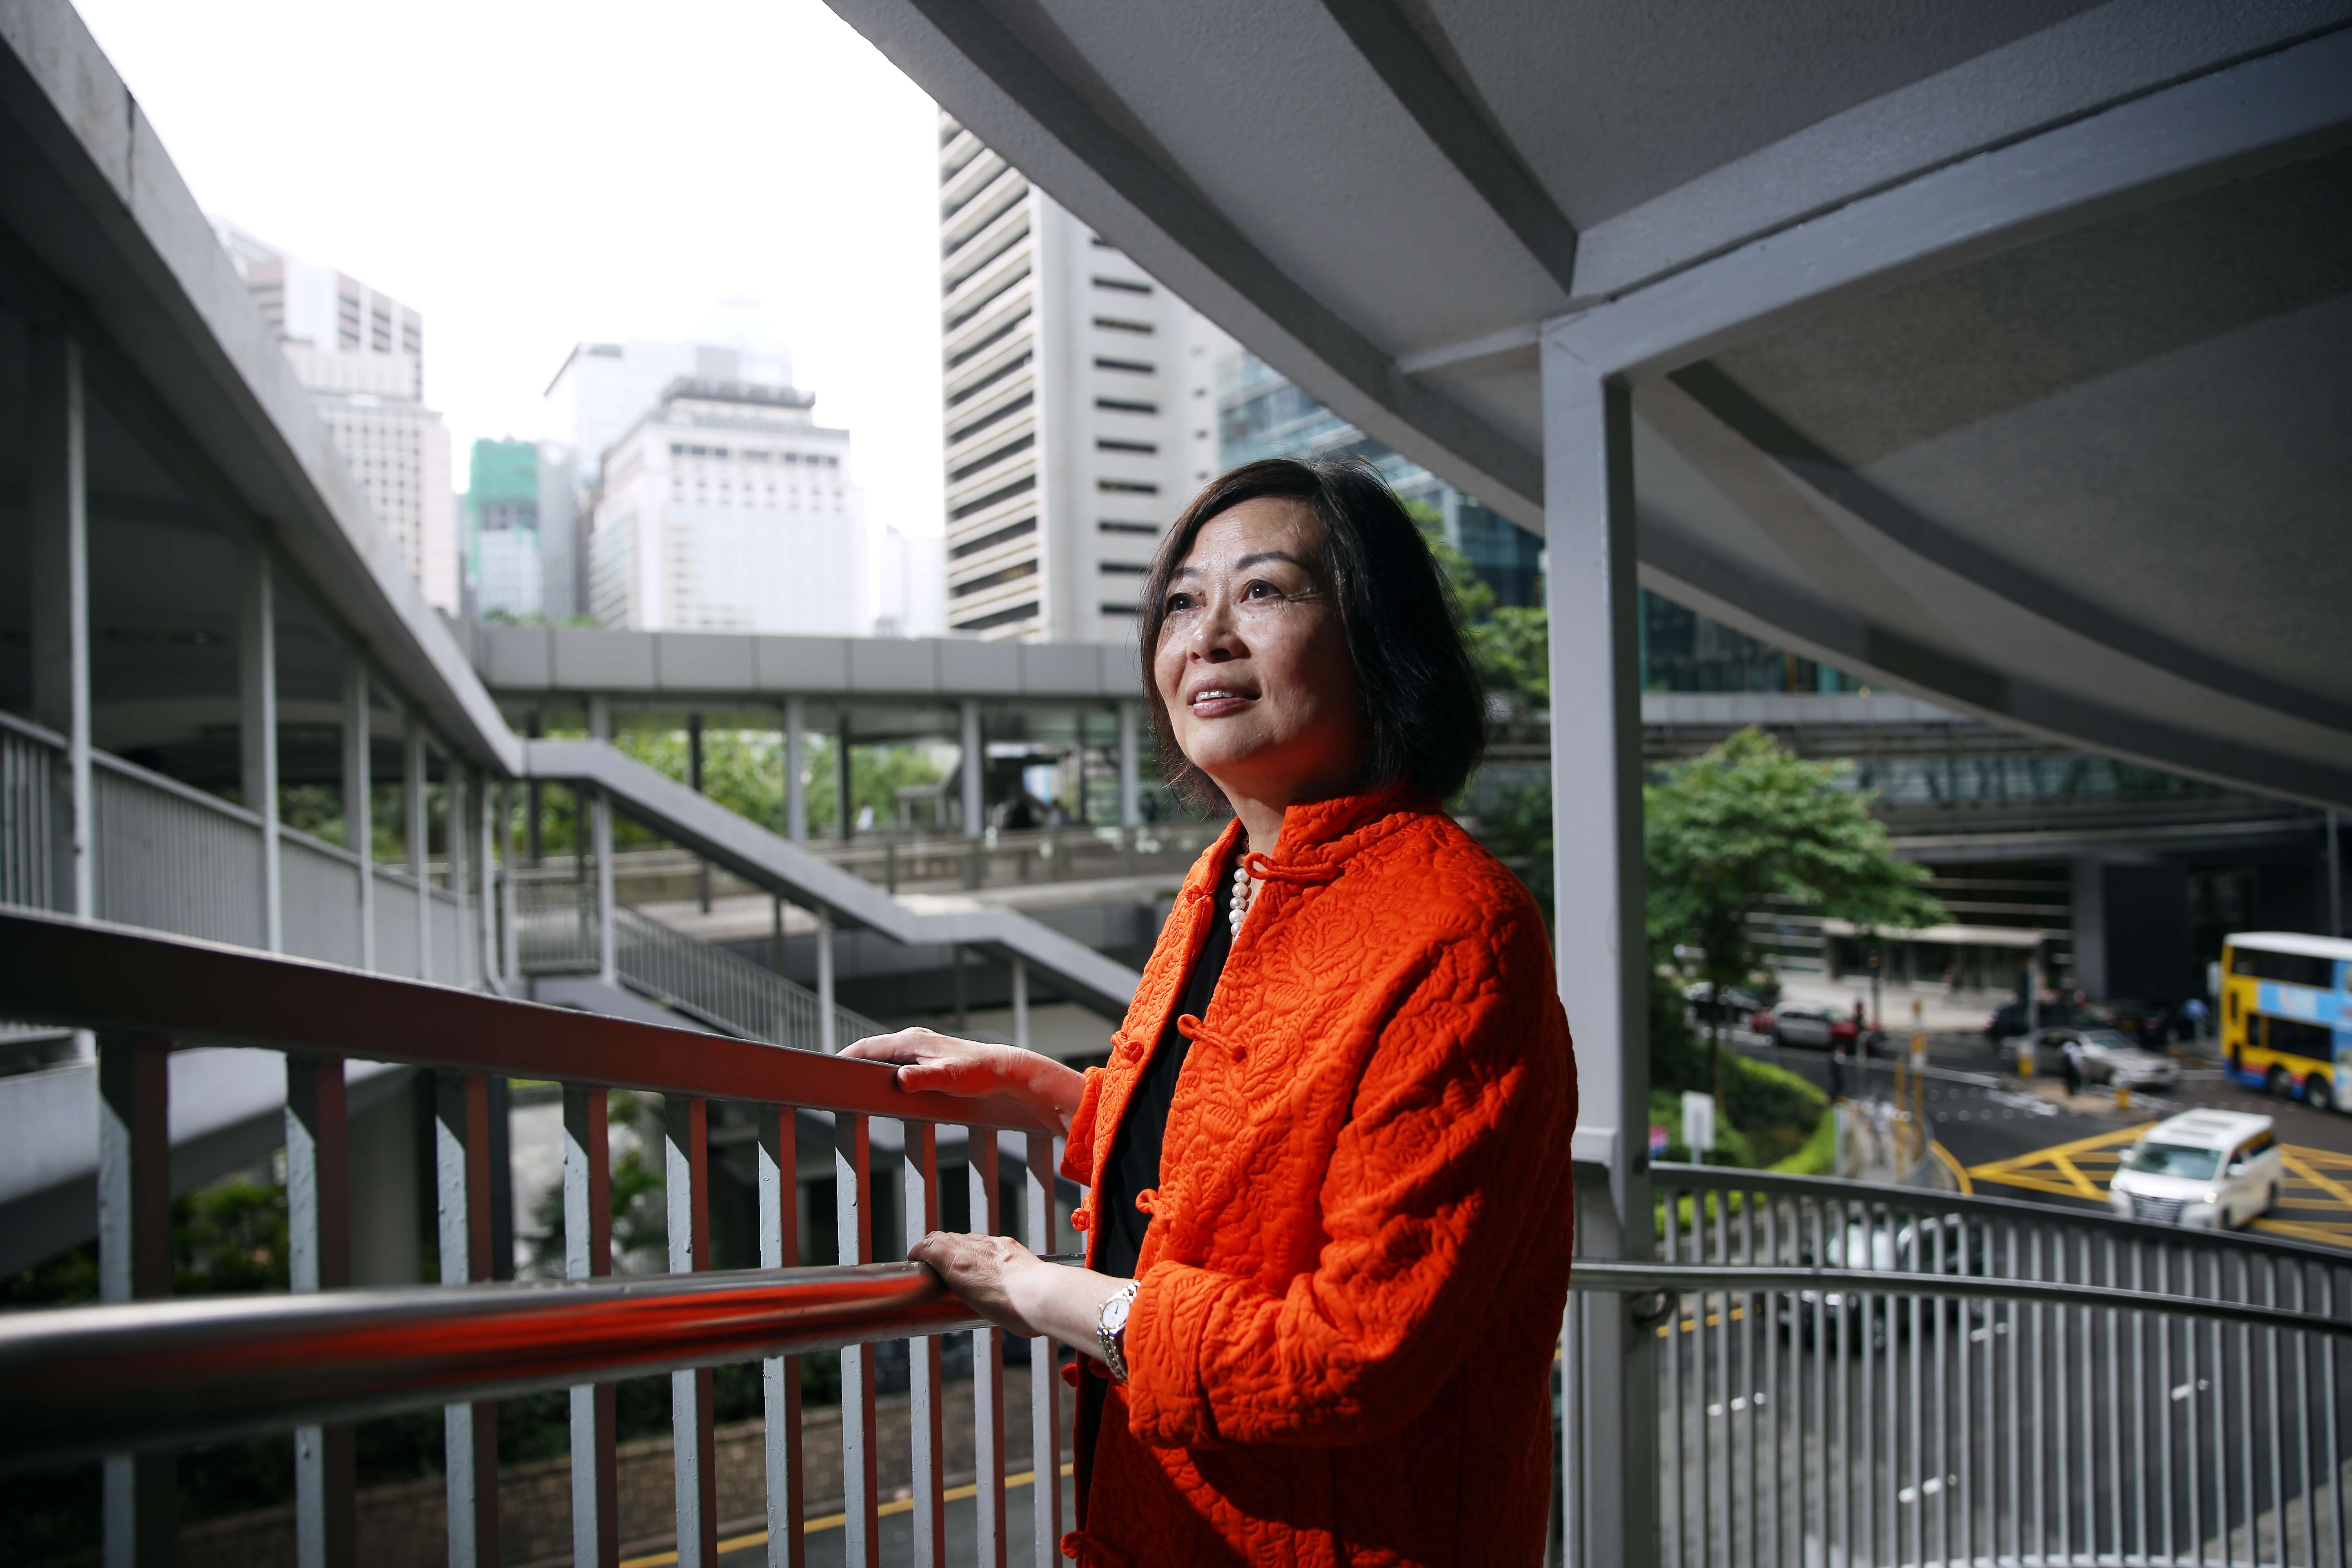 Anna Wu chaired the Equal Opportunities Commission from 1999 to 2003. Photo: Sam Tsang